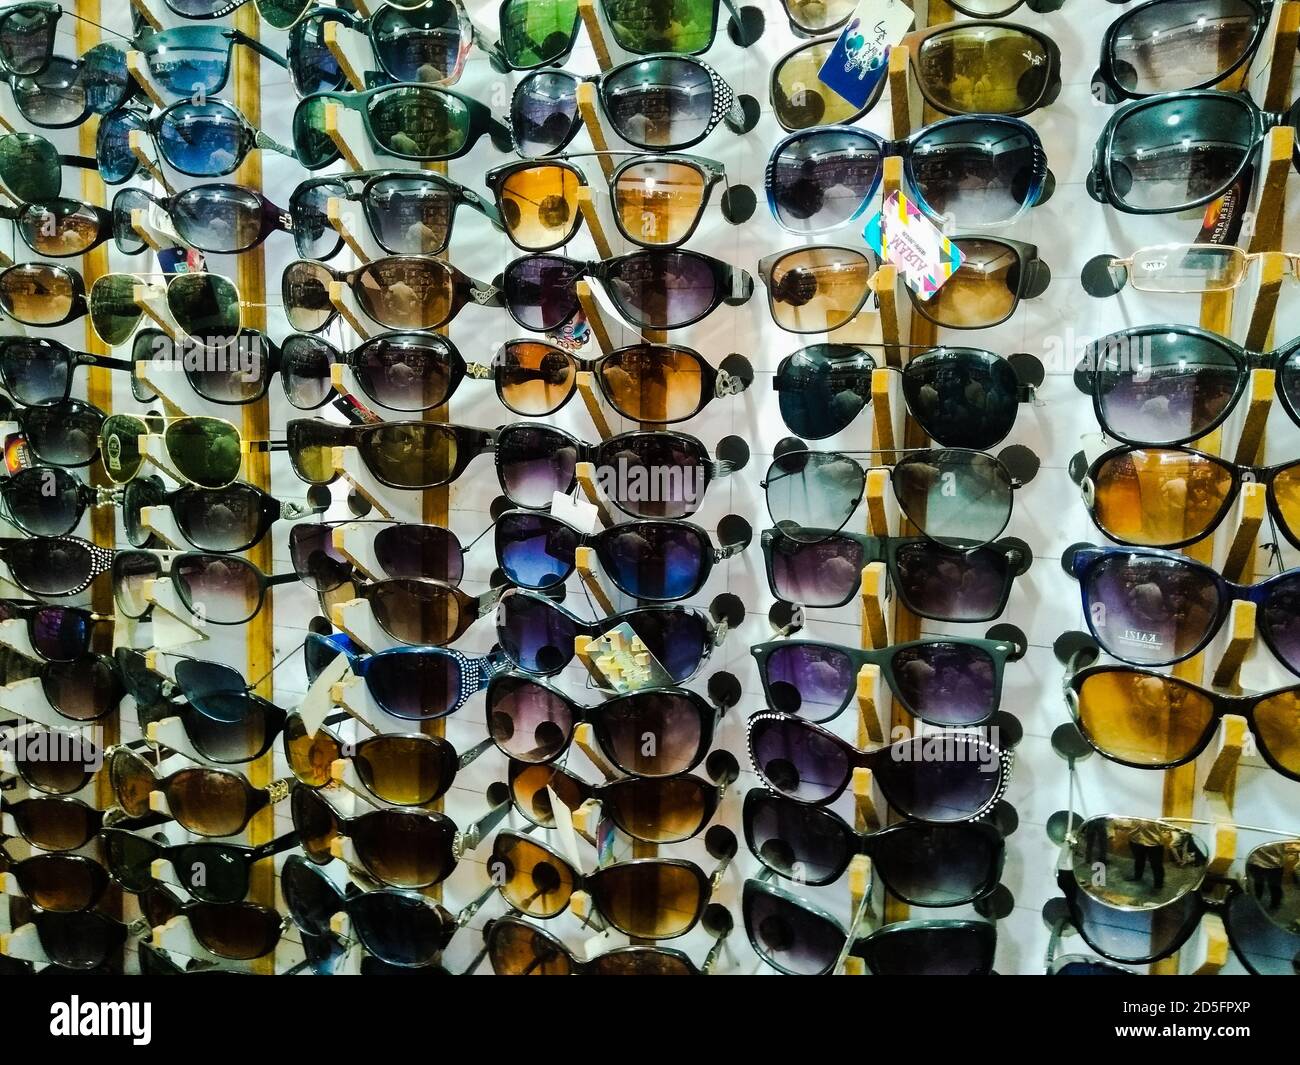 Utter pardesh , india - eye goggles , A picture of eye goggles in noida 27 september 2020 Stock Photo